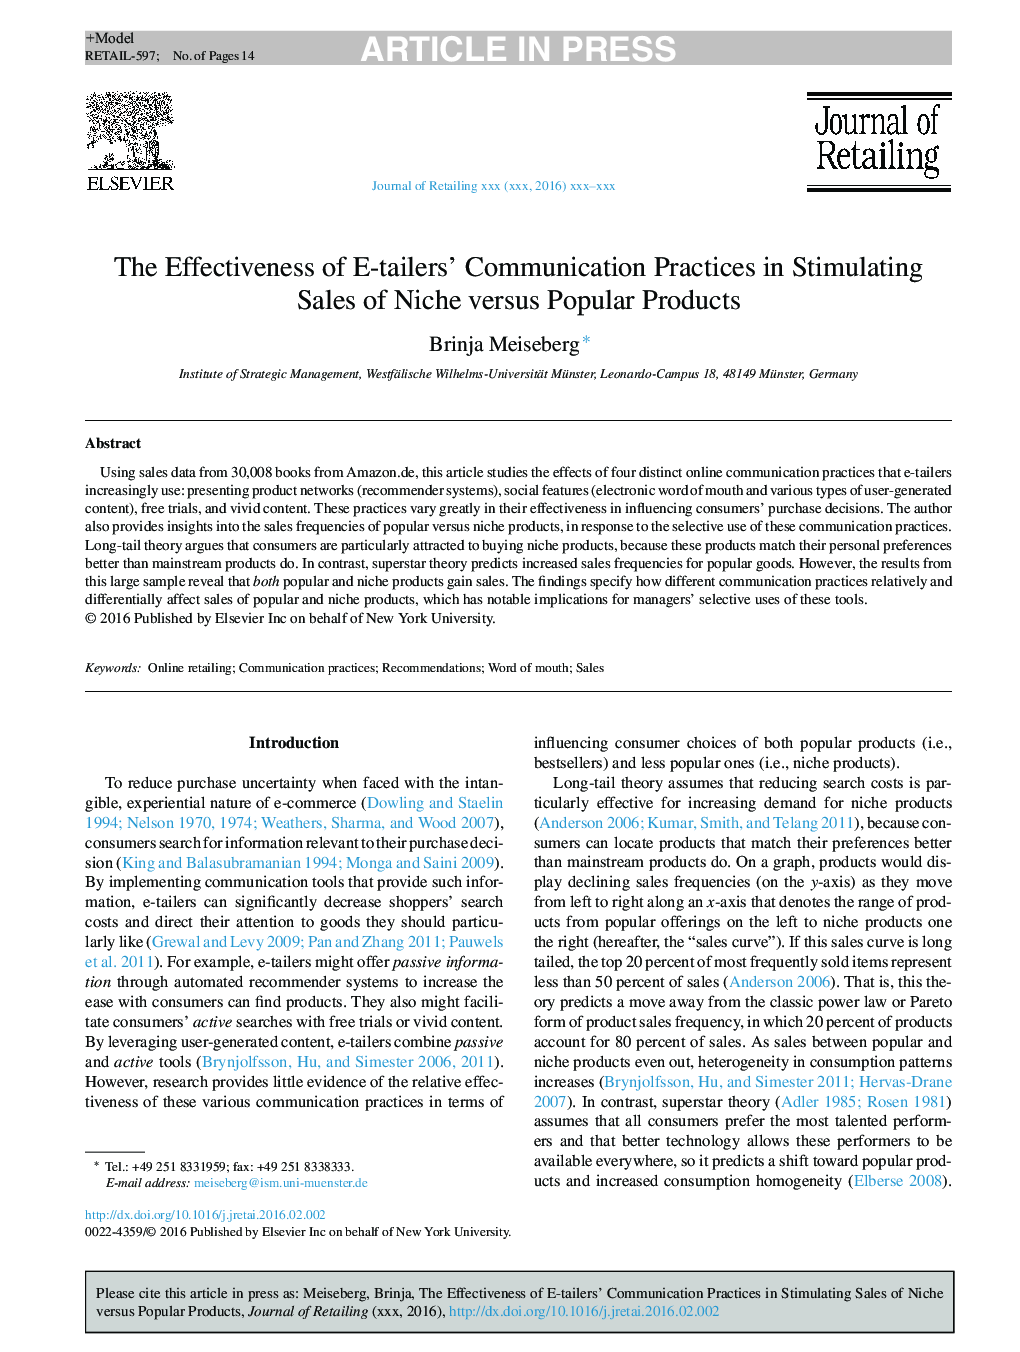 The Effectiveness of E-tailers' Communication Practices in Stimulating Sales of Niche versus Popular Products